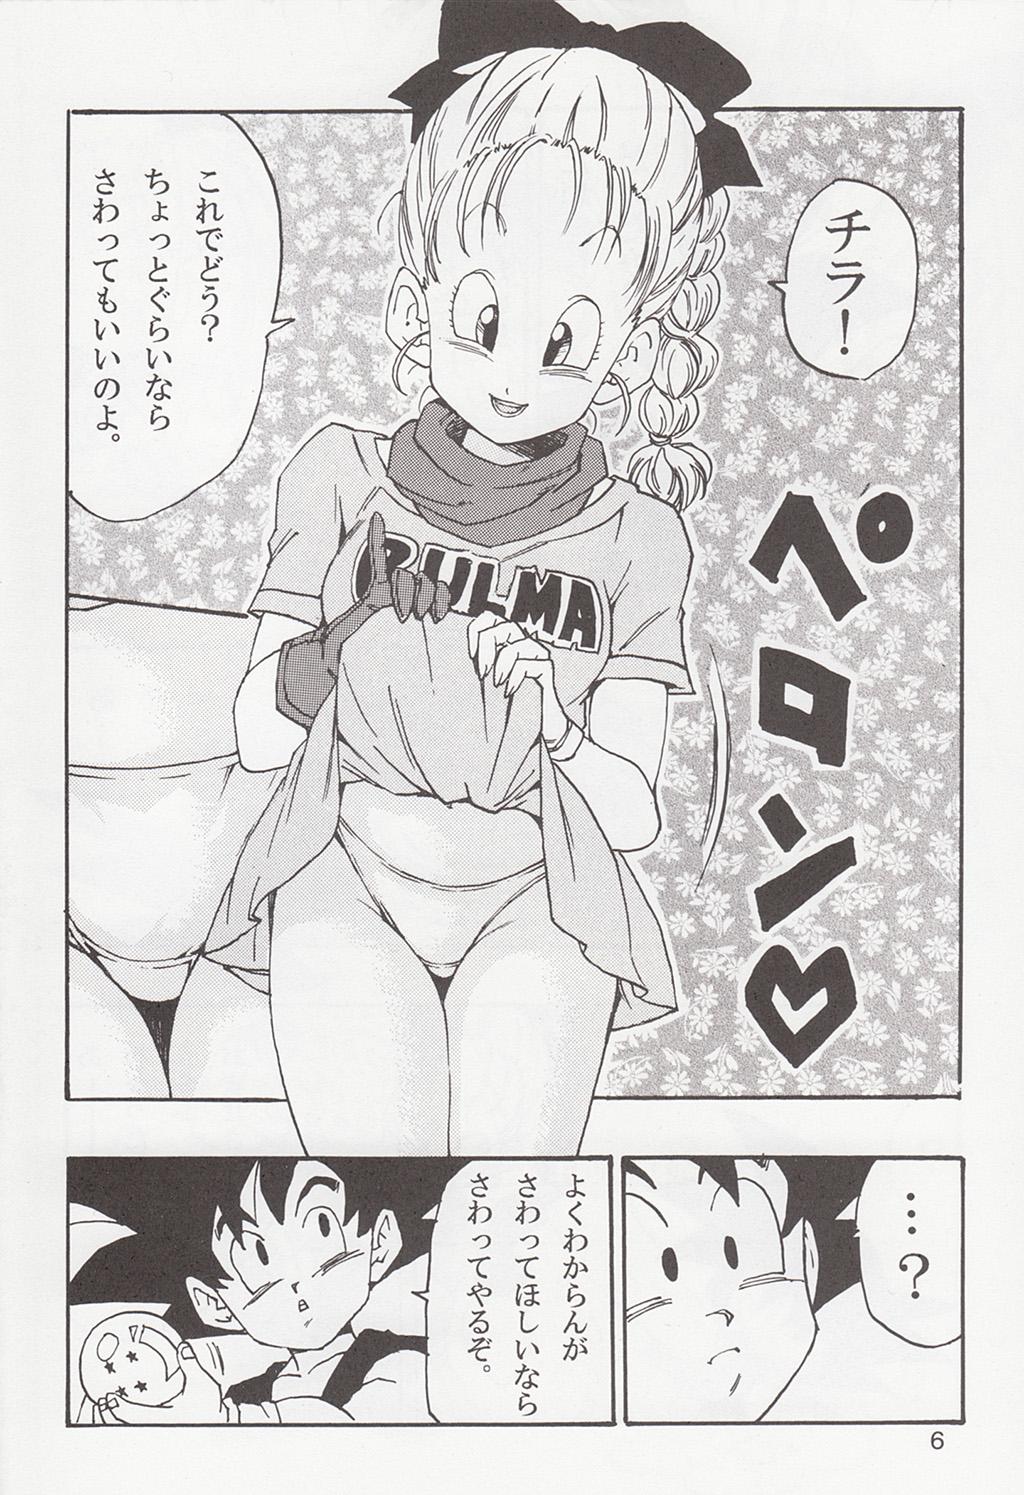 Wet Cunts Dragon Ball EB 1 - Episode of Bulma - Dragon ball Dominate - Page 6